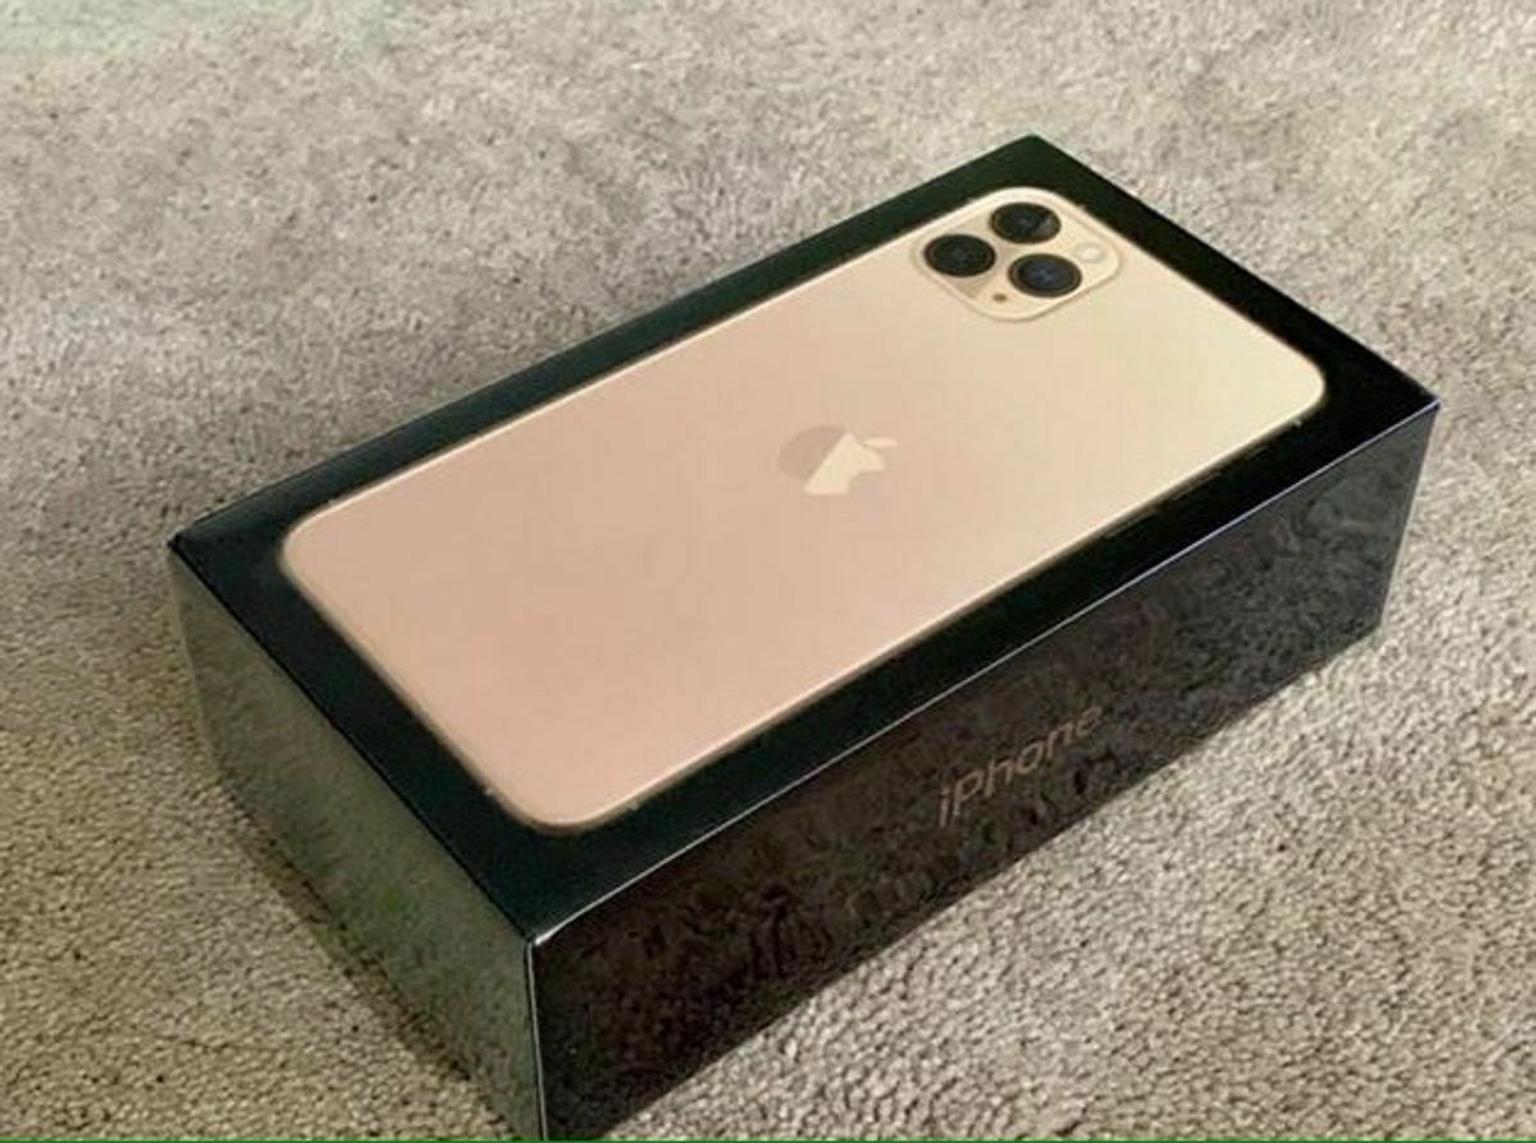 Apple iPhone 11 Pro Max 512GB Gold in 80918 Colorado Springs for US$750